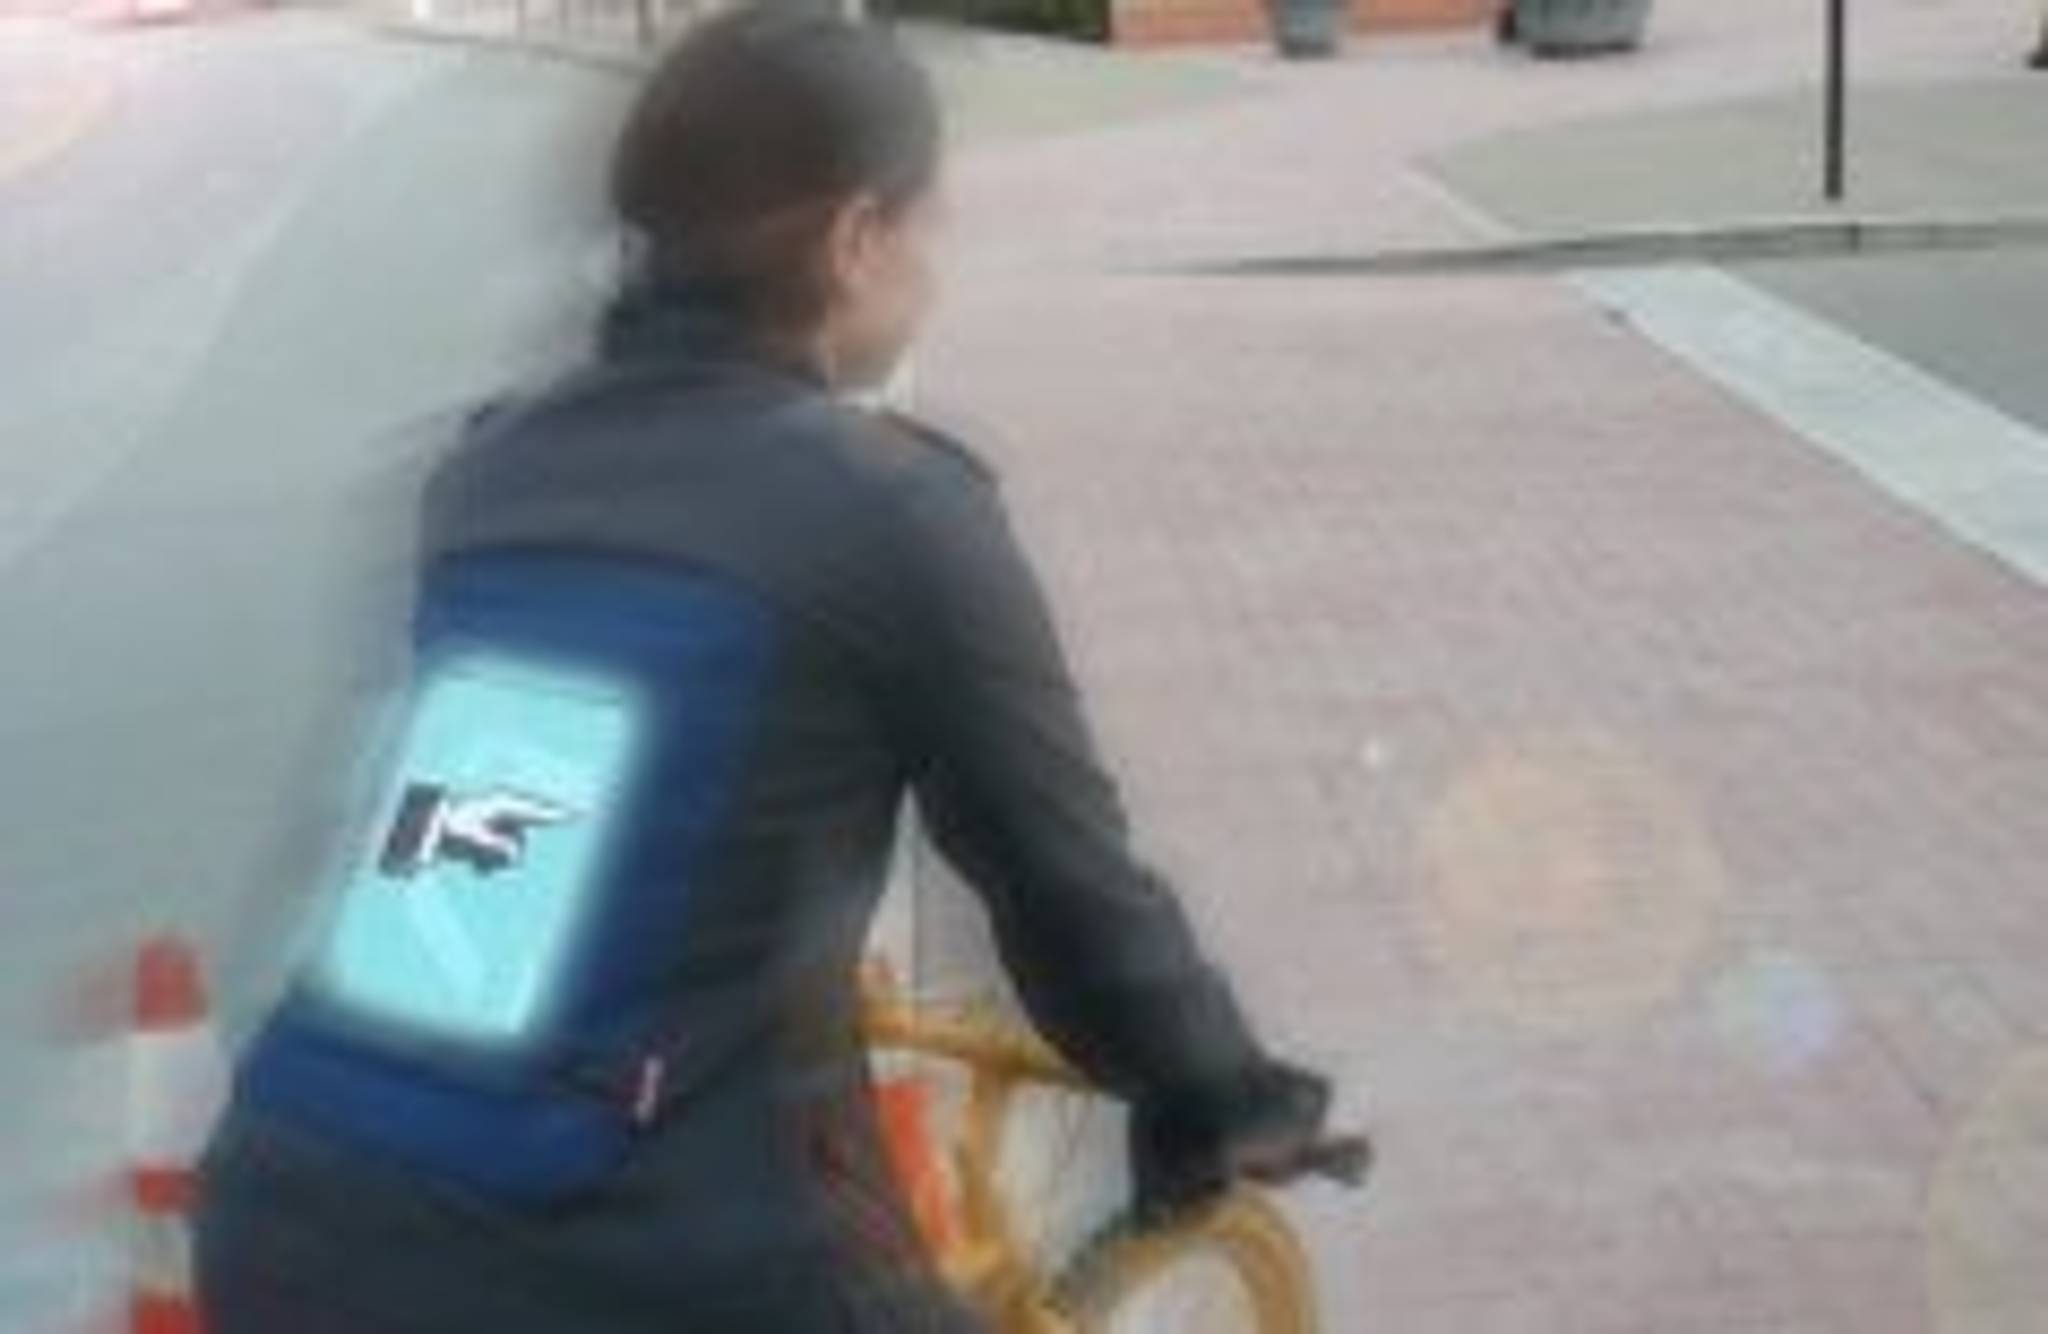 Cycling made safer with iPad